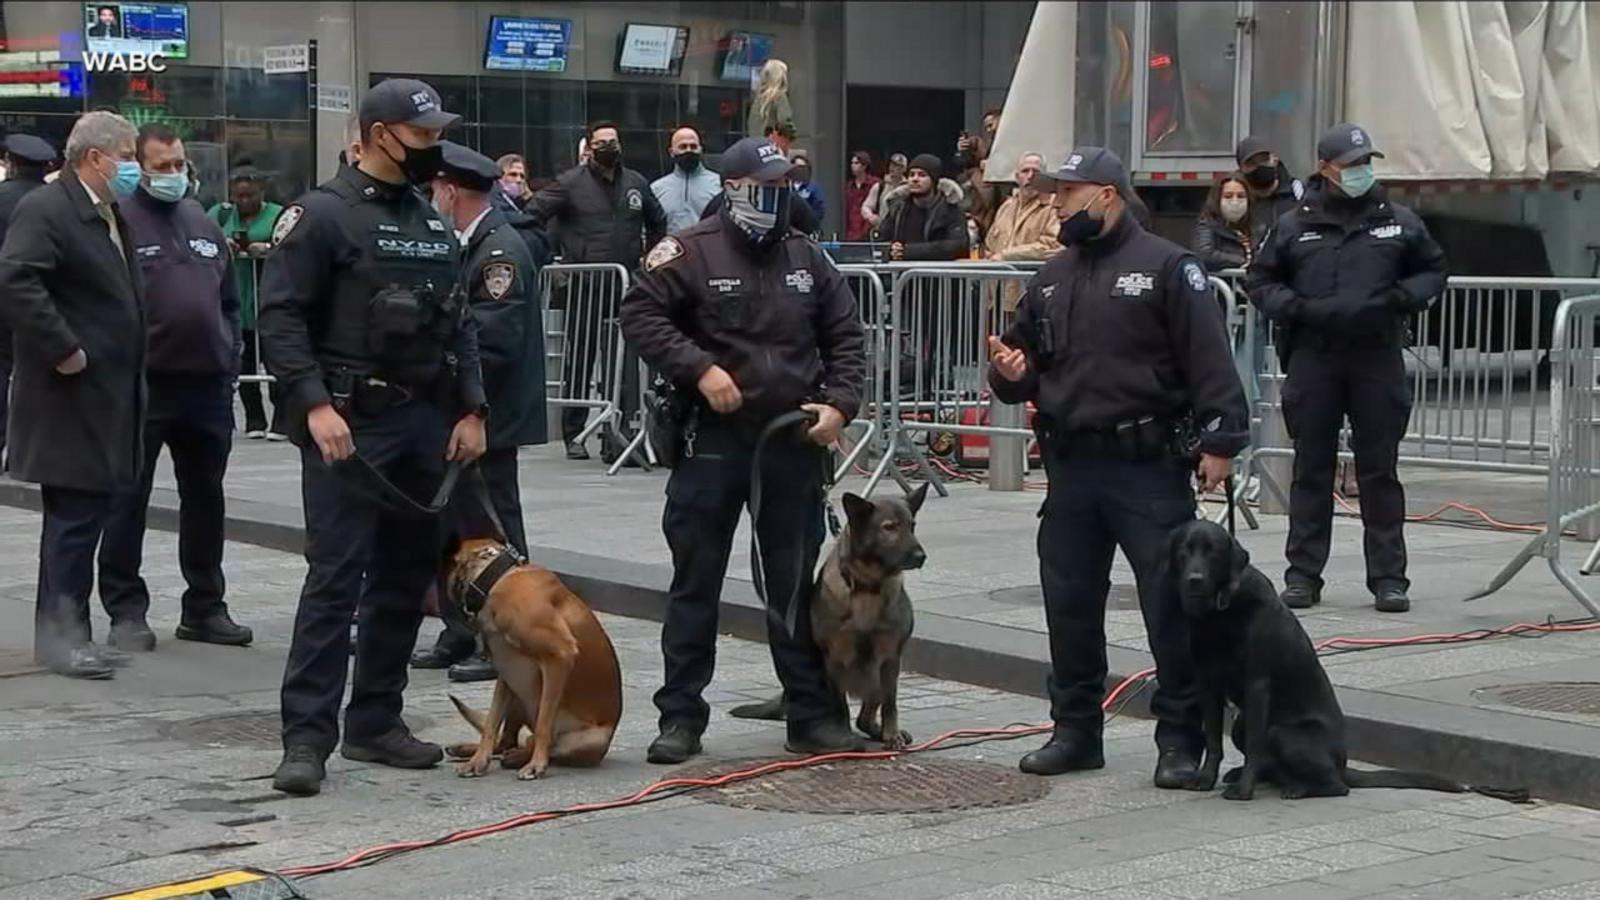 VIDEO: NYPD tightens security ahead of New Year's celebrations